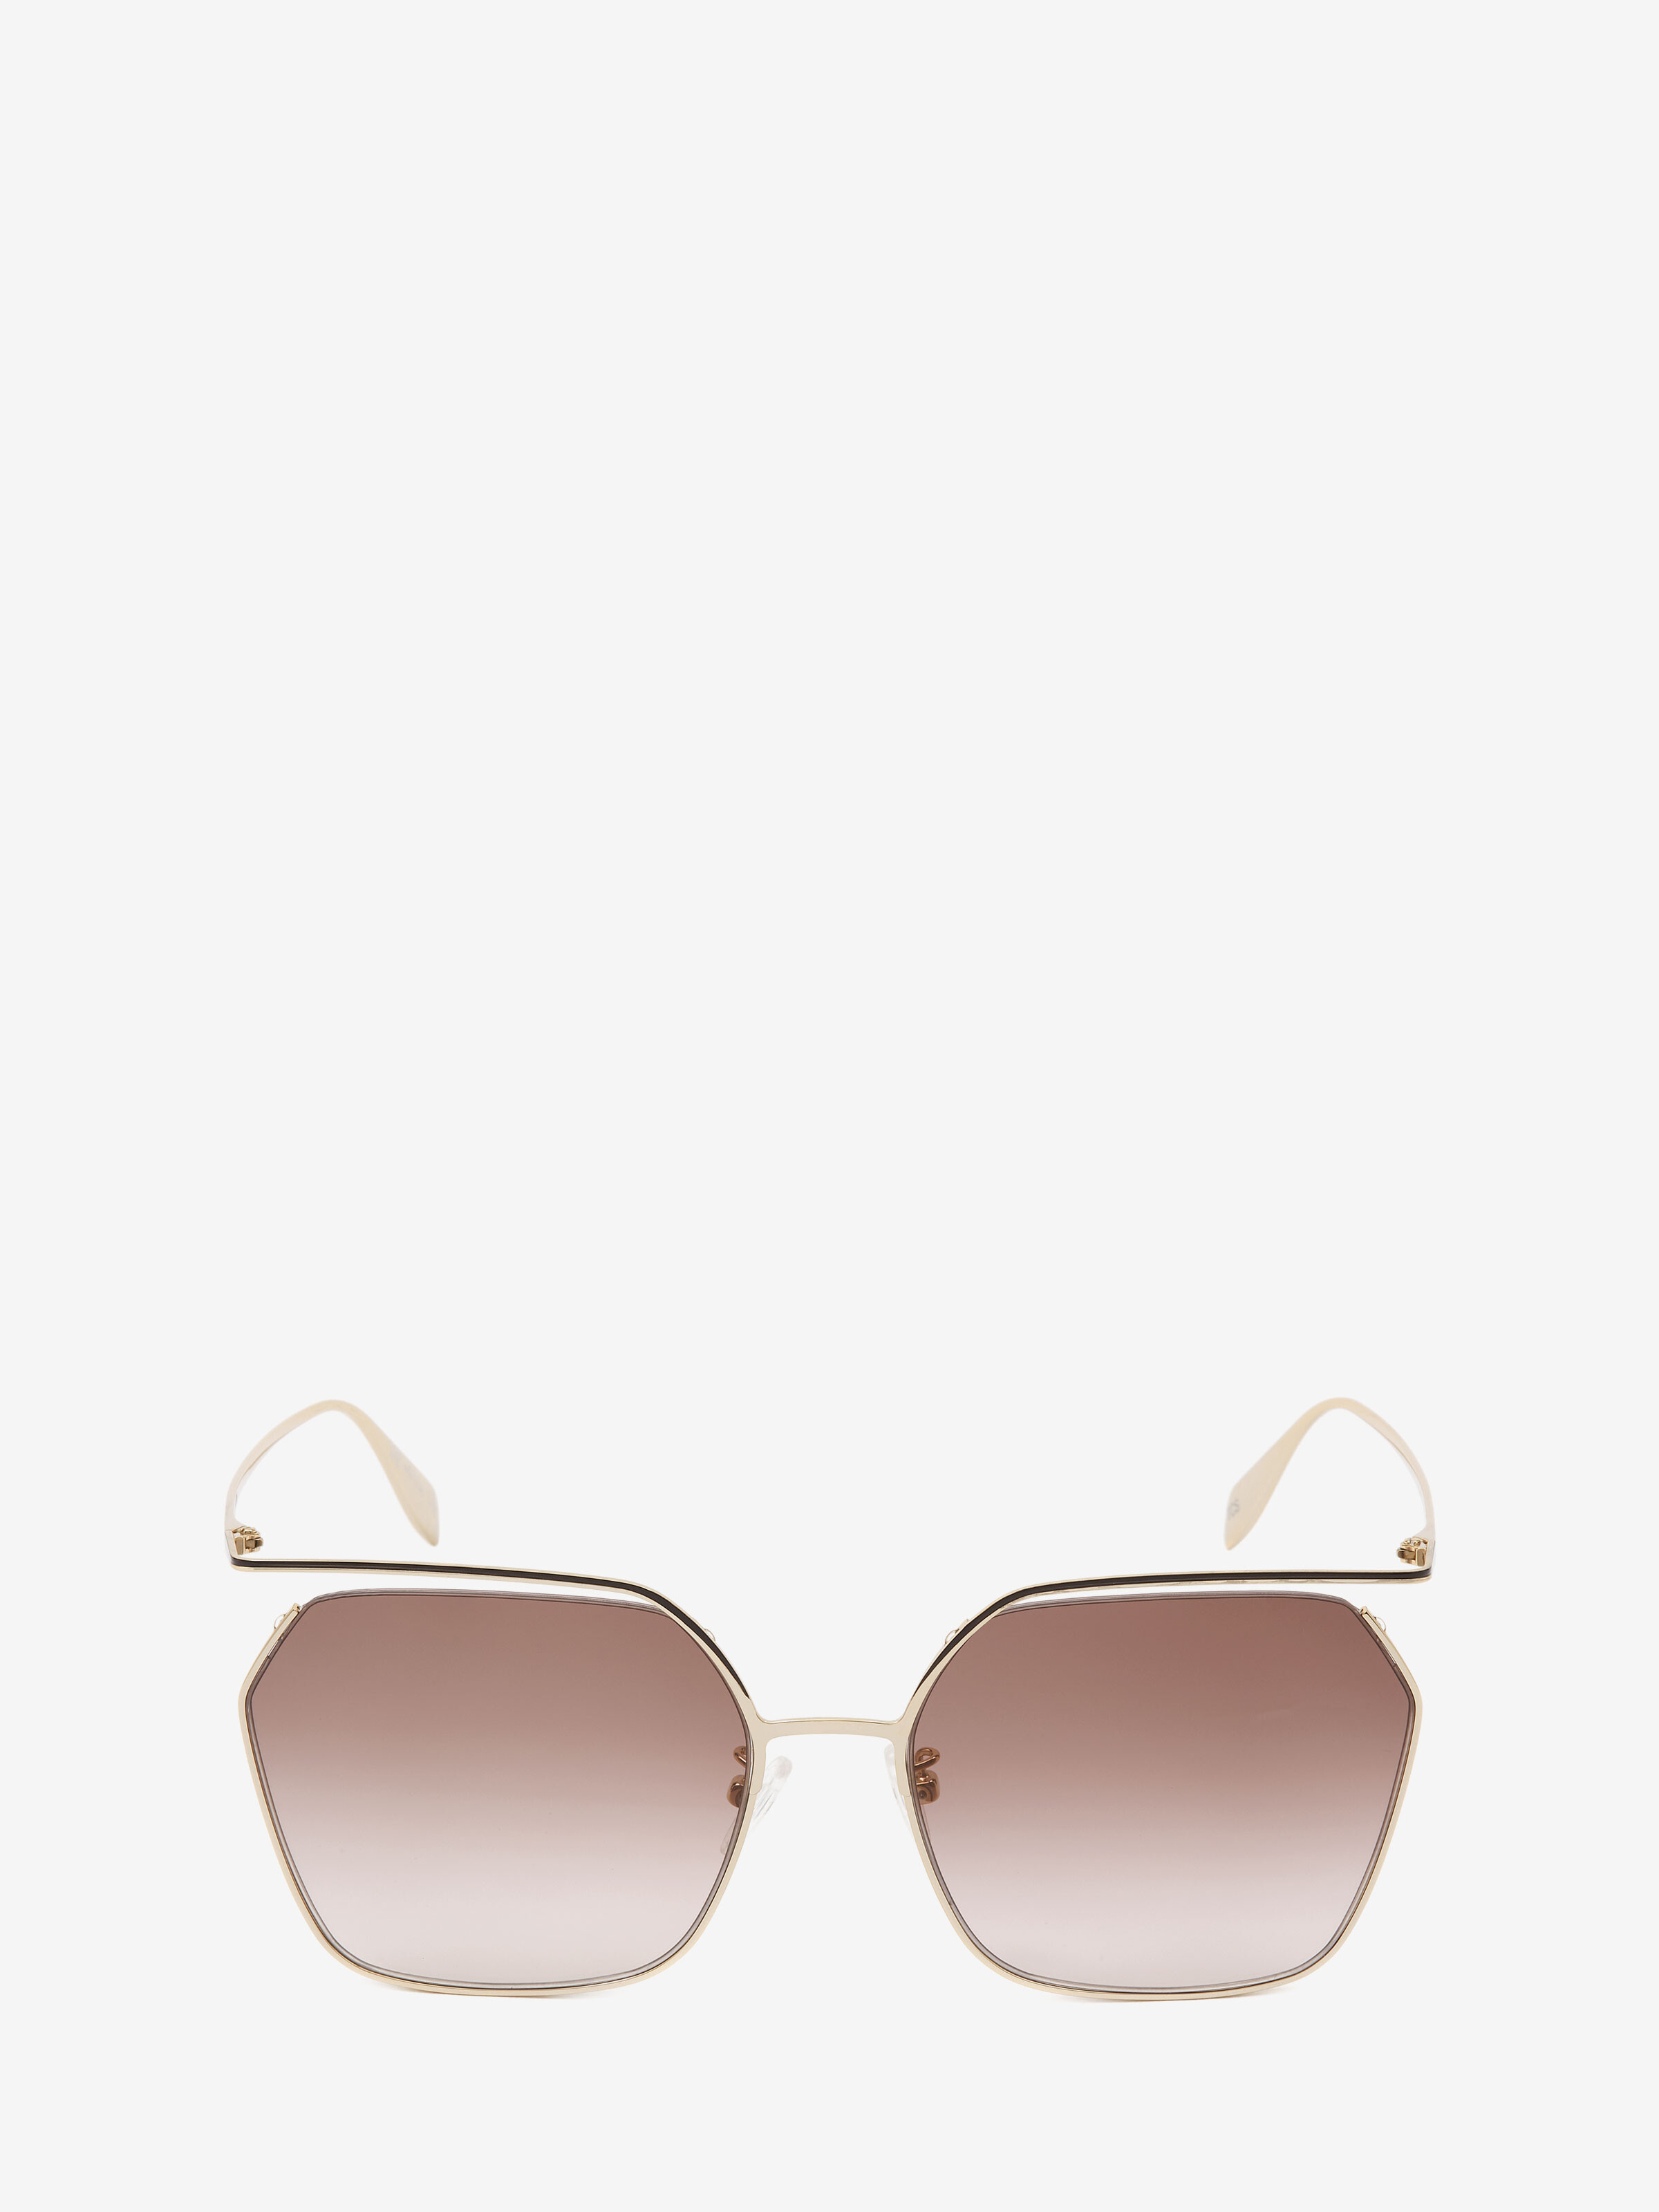 Alexander Mcqueen The Cut Square Sunglasses In 002 Gold Gold Brown ...